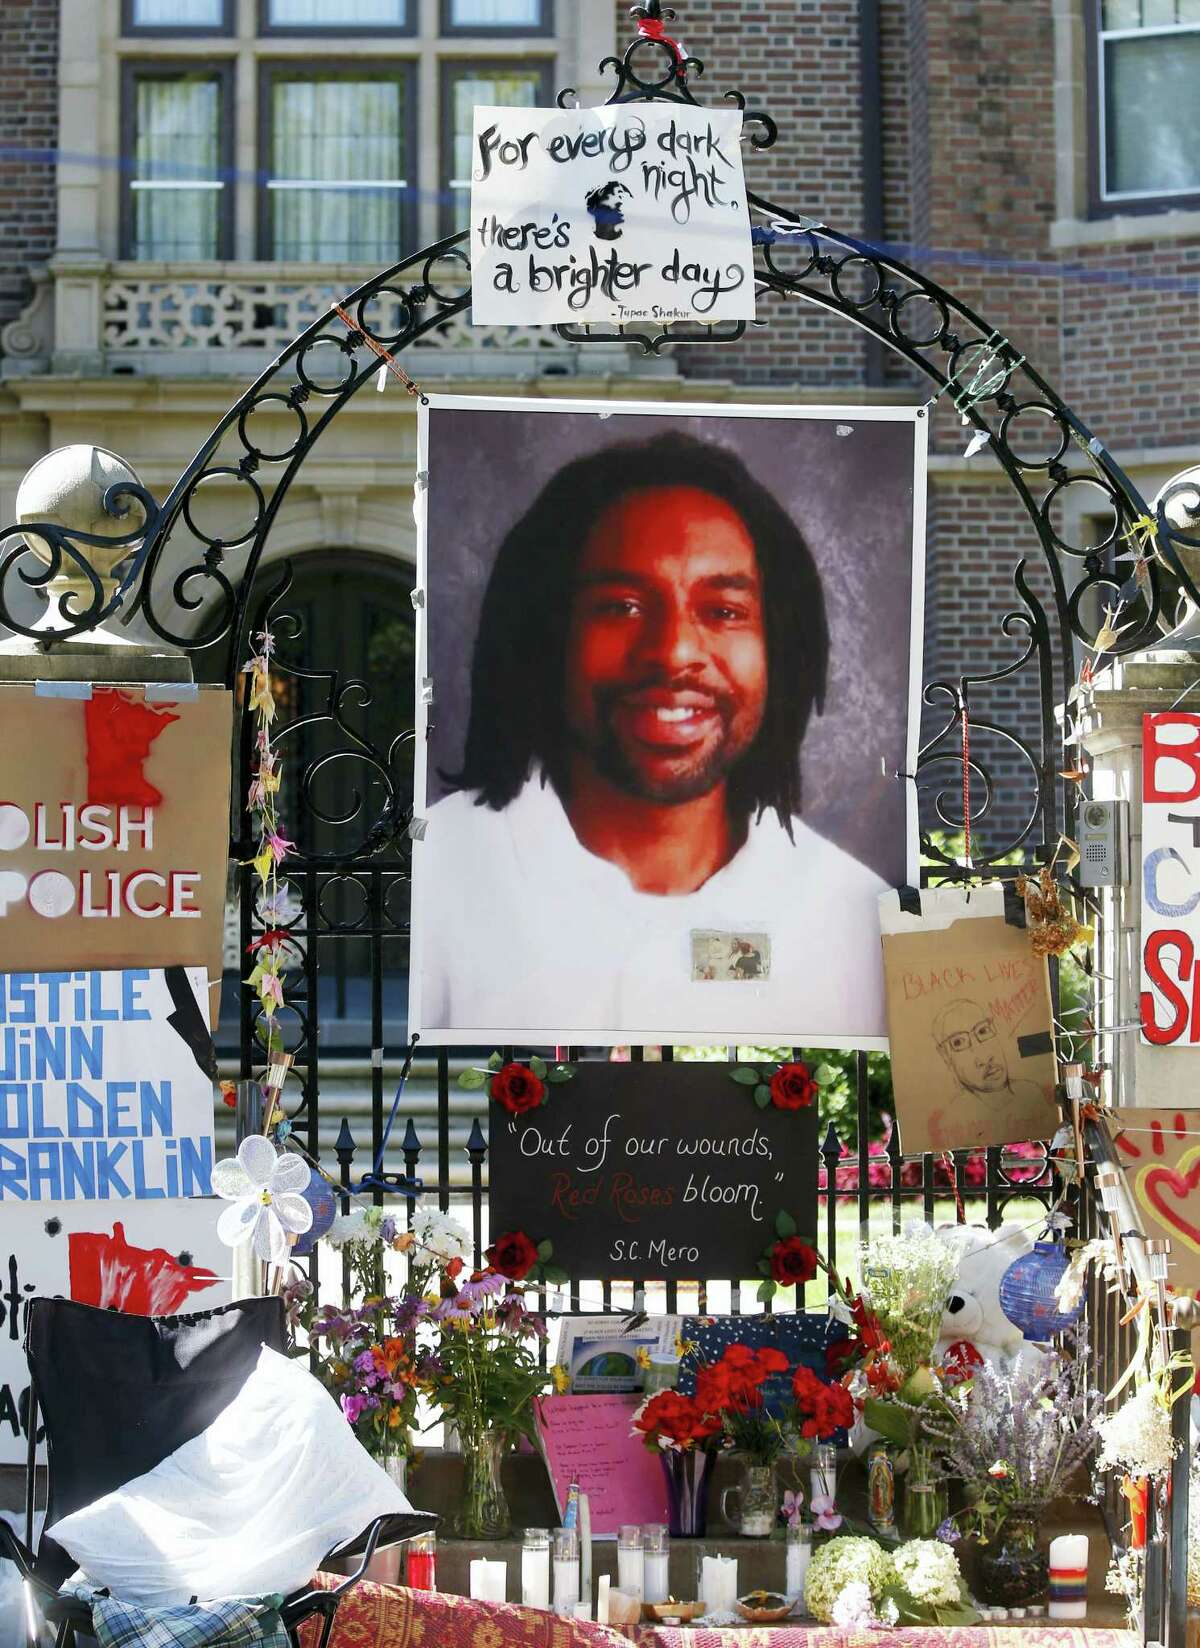 In this July 25, 2016, file photo, a memorial including a photo of Philando Castile adorns the gate to the governor’s residence where protesters continue to demonstrate in St. Paul, Minn., against the July 6 shooting death of Castile by St. Anthony police officer Jeronimo Yanez during a traffic stop in Falcon Heights, Minn. Prosecutors announced Wednesday, Nov. 16, 2016, that Yanez has been charged with second-degree manslaughter in the killing.